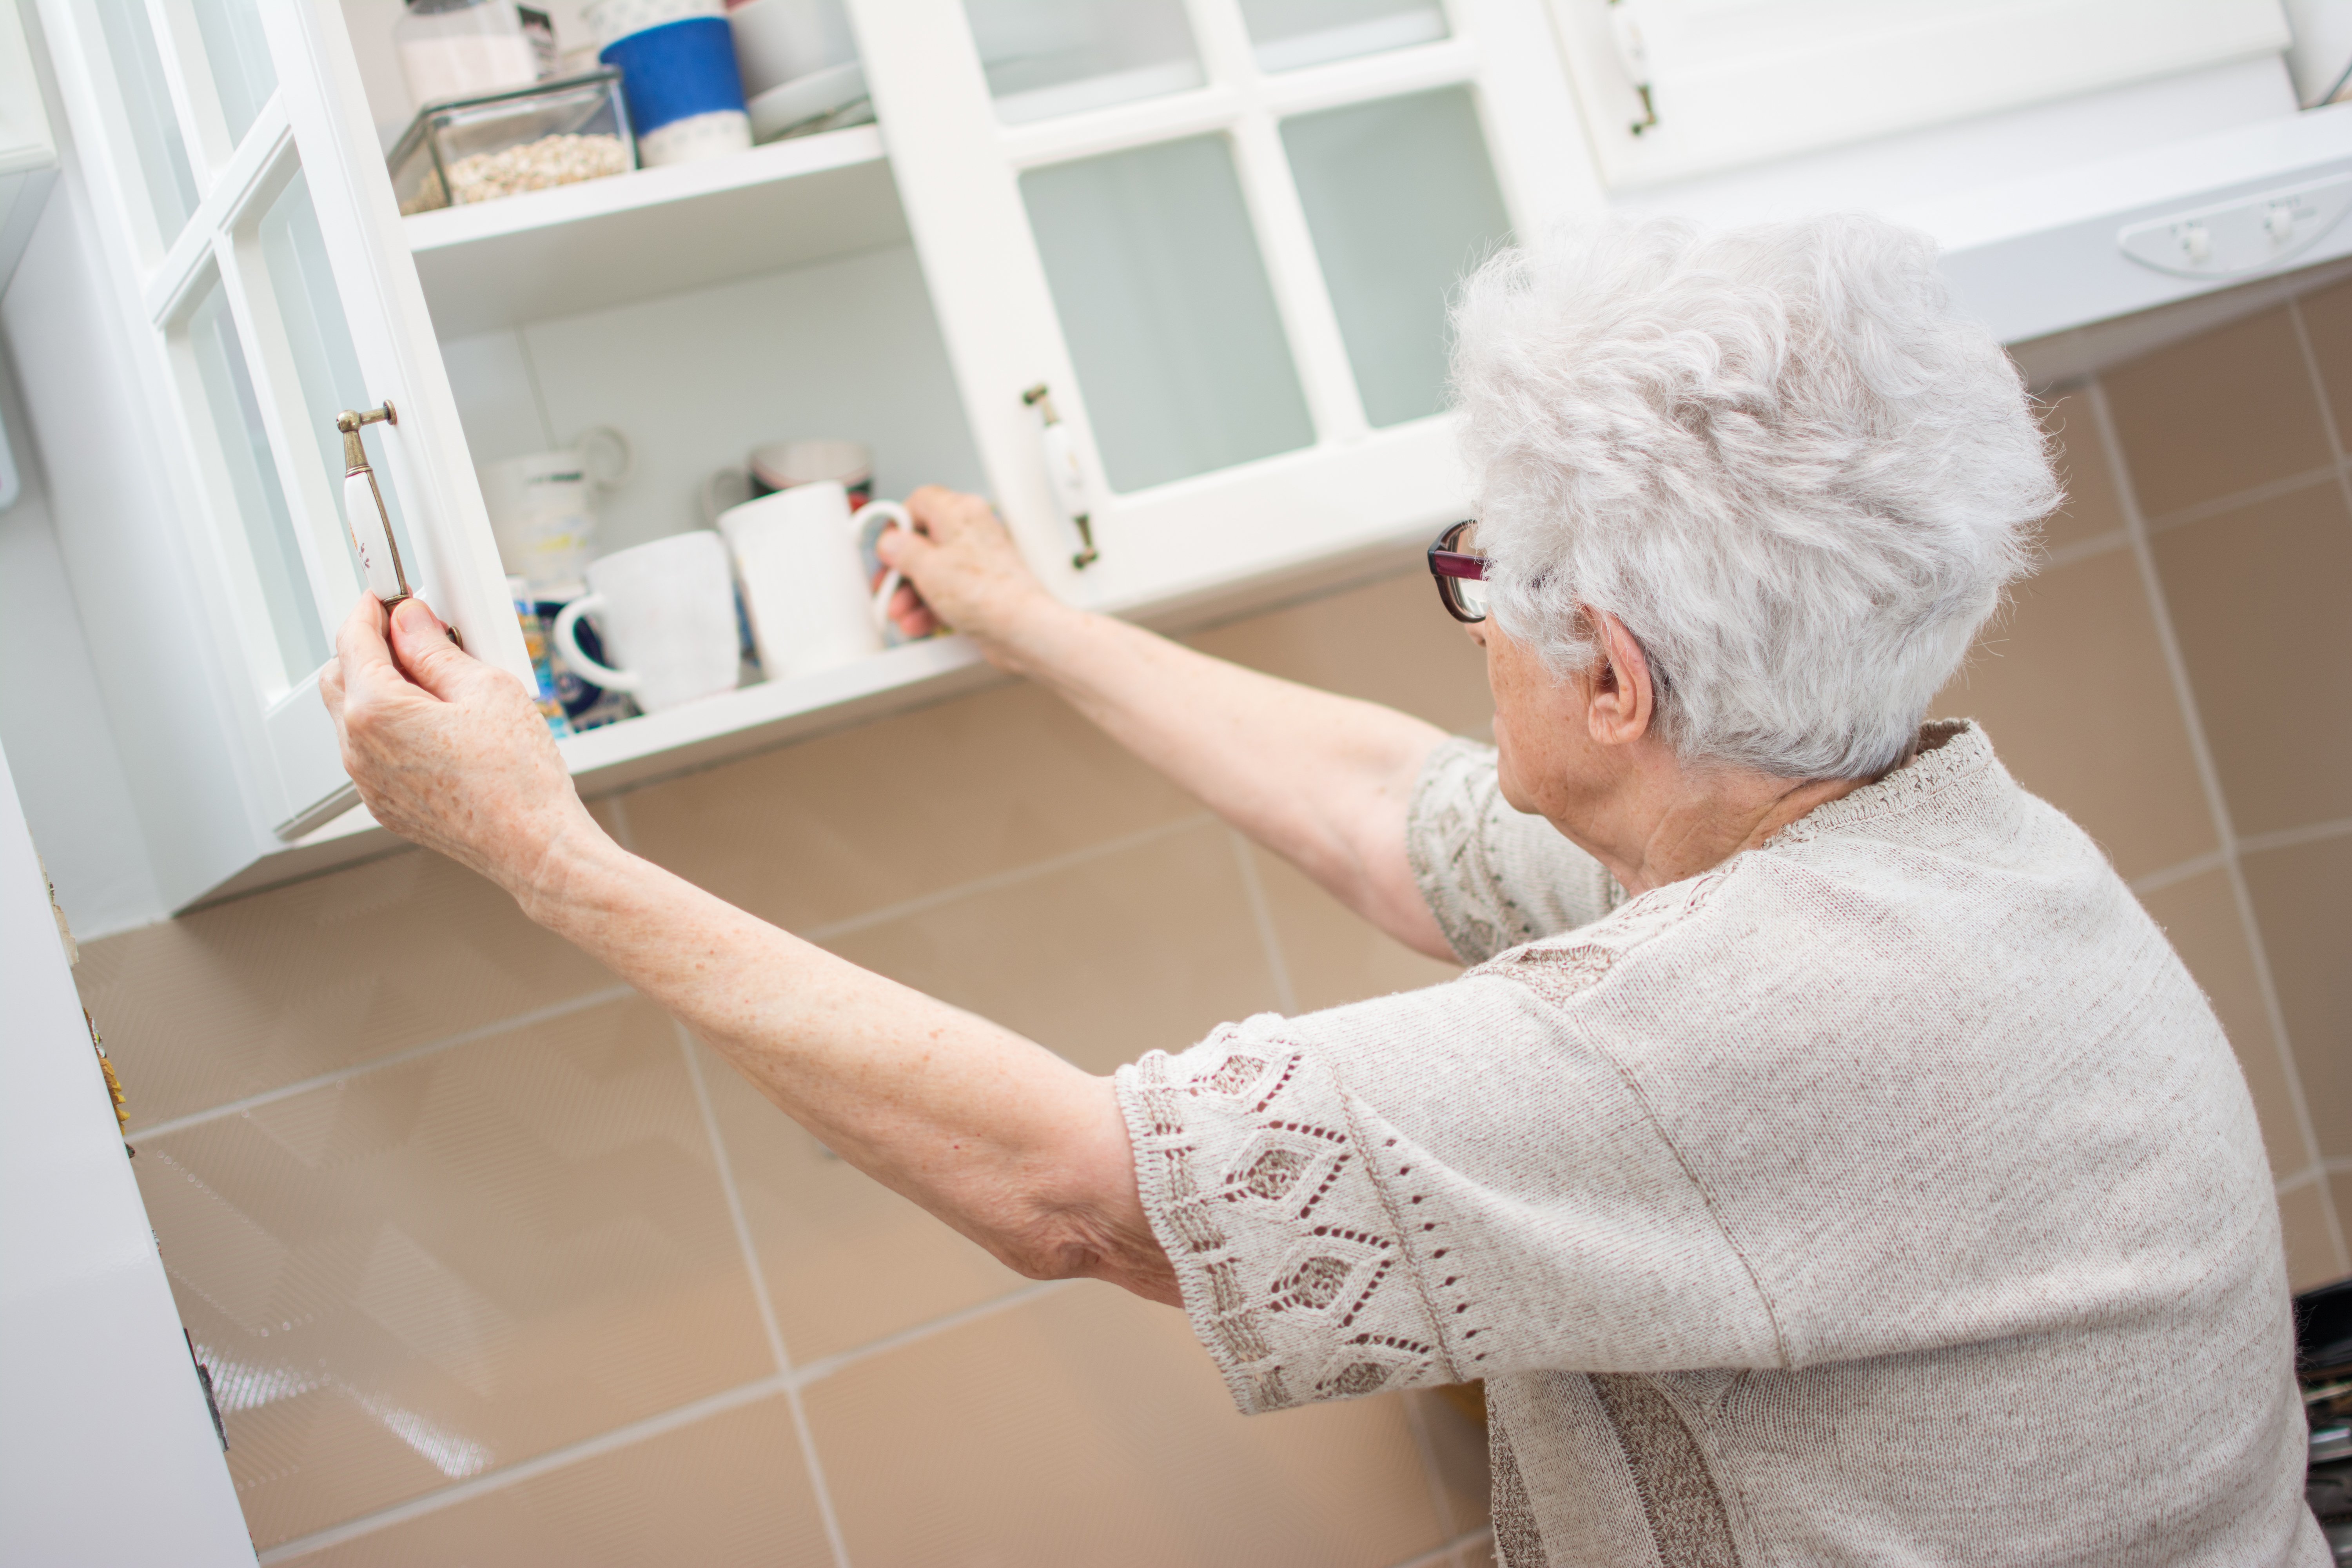 women putting her dishes away in her cabinets